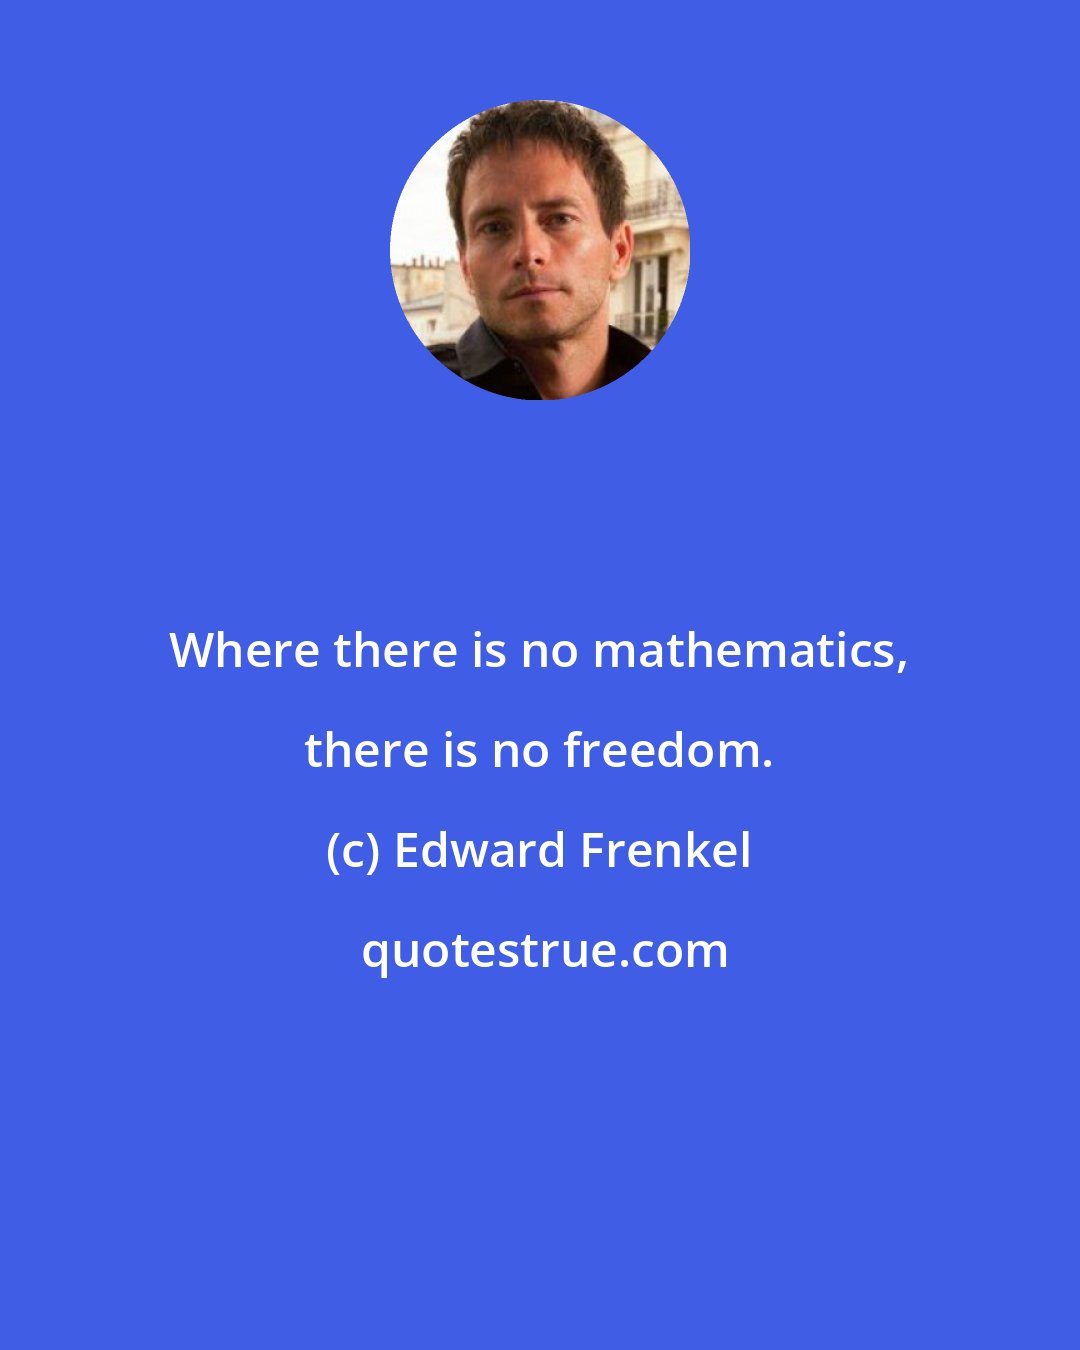 Edward Frenkel: Where there is no mathematics, there is no freedom.